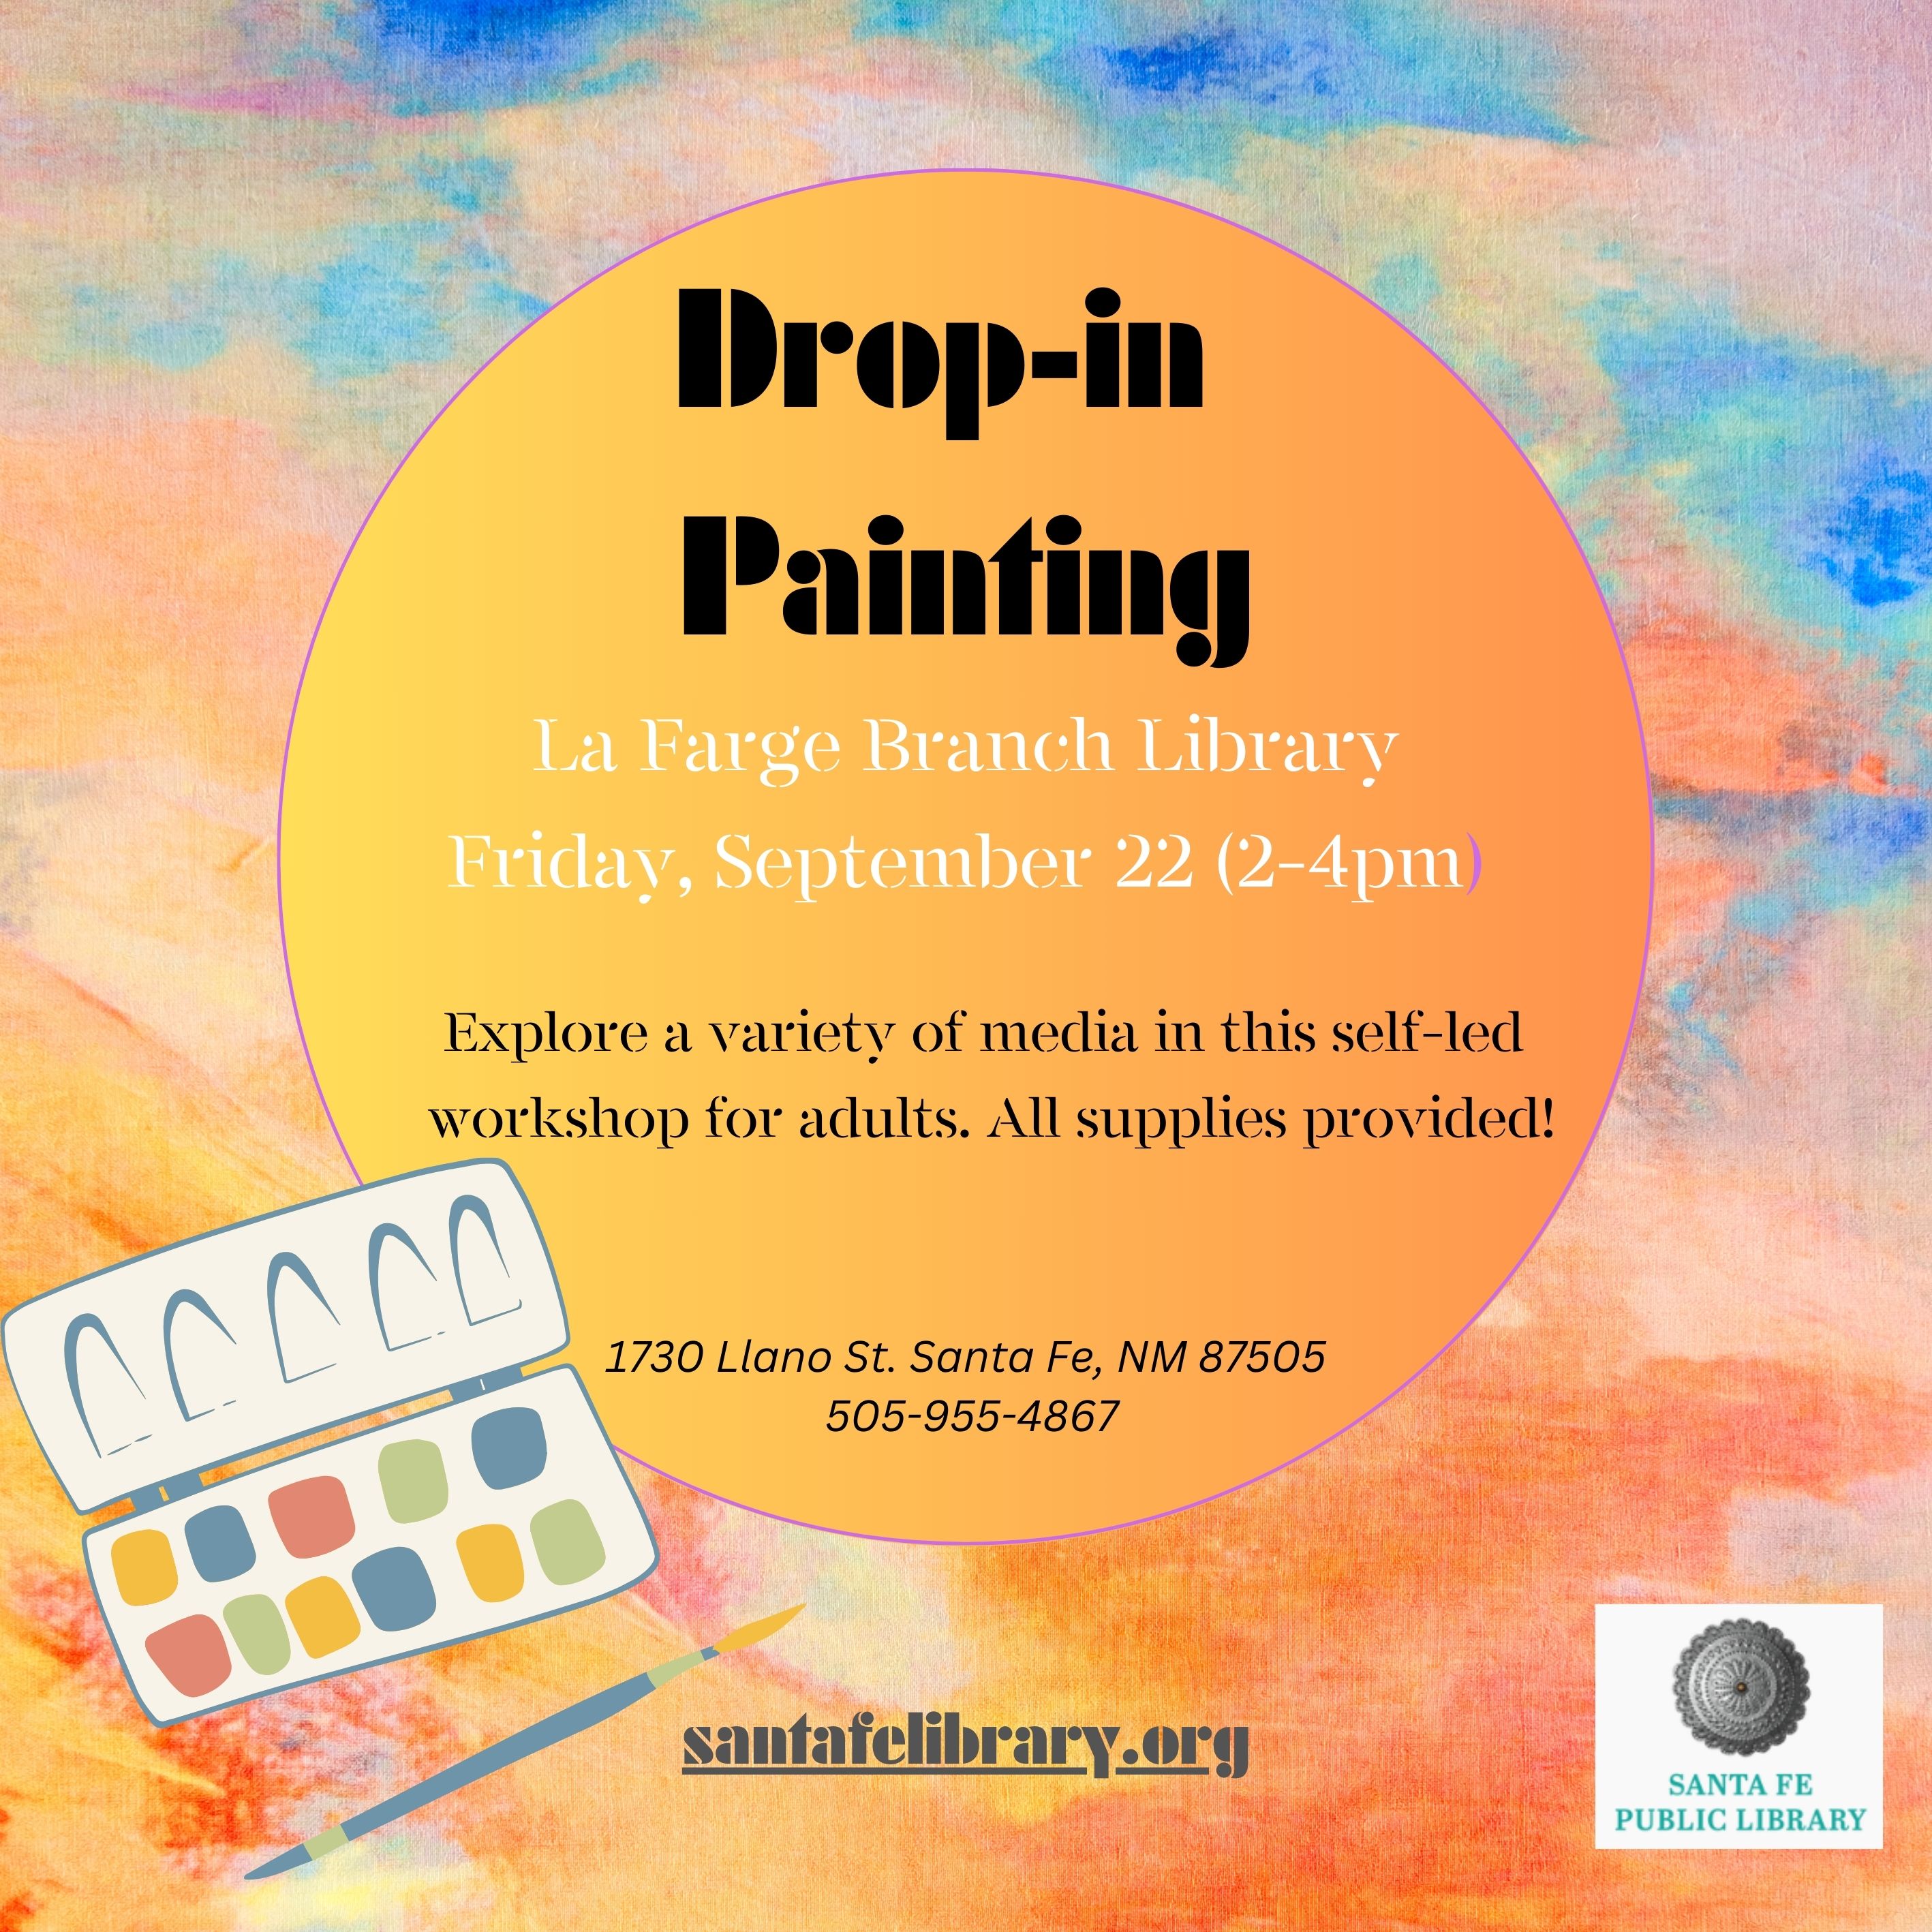 Drop-in Painting